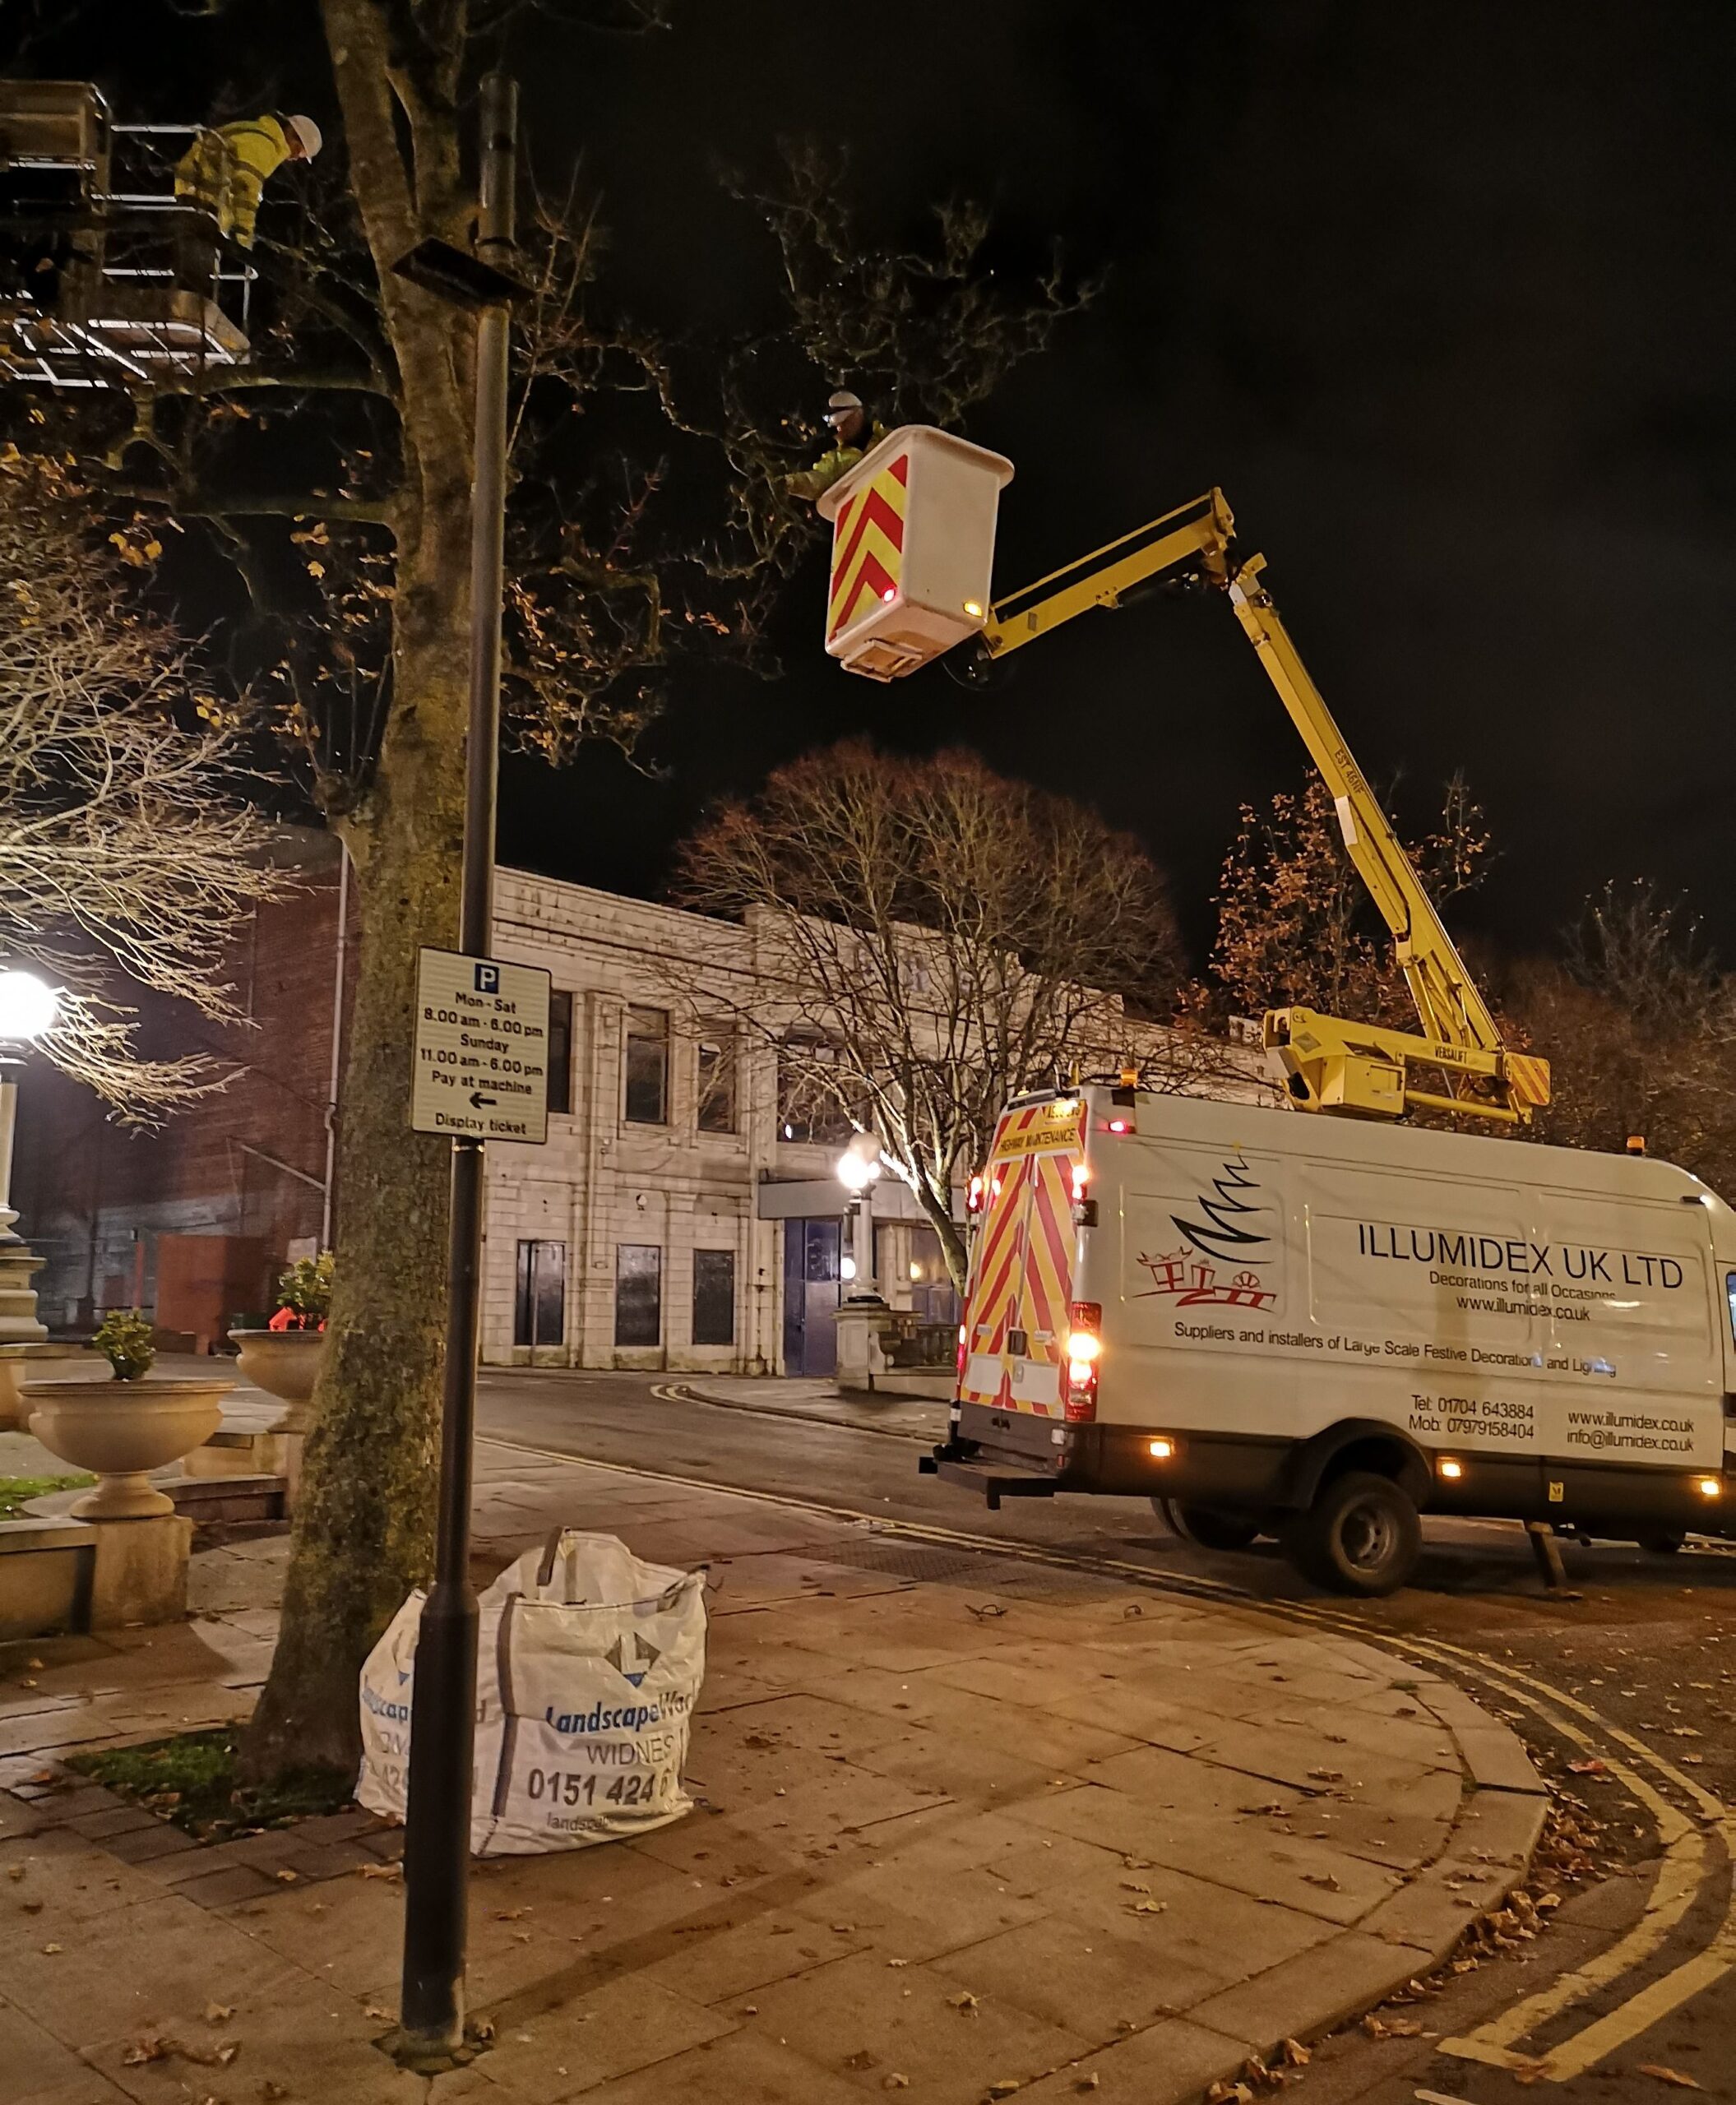 IllumiDex UK Ltd has begun the process of removing and replacing decorative lights along the mile-long length of the Lord Street shopping boulevard in Southport thanks to Southport BID and Southport Town Deal